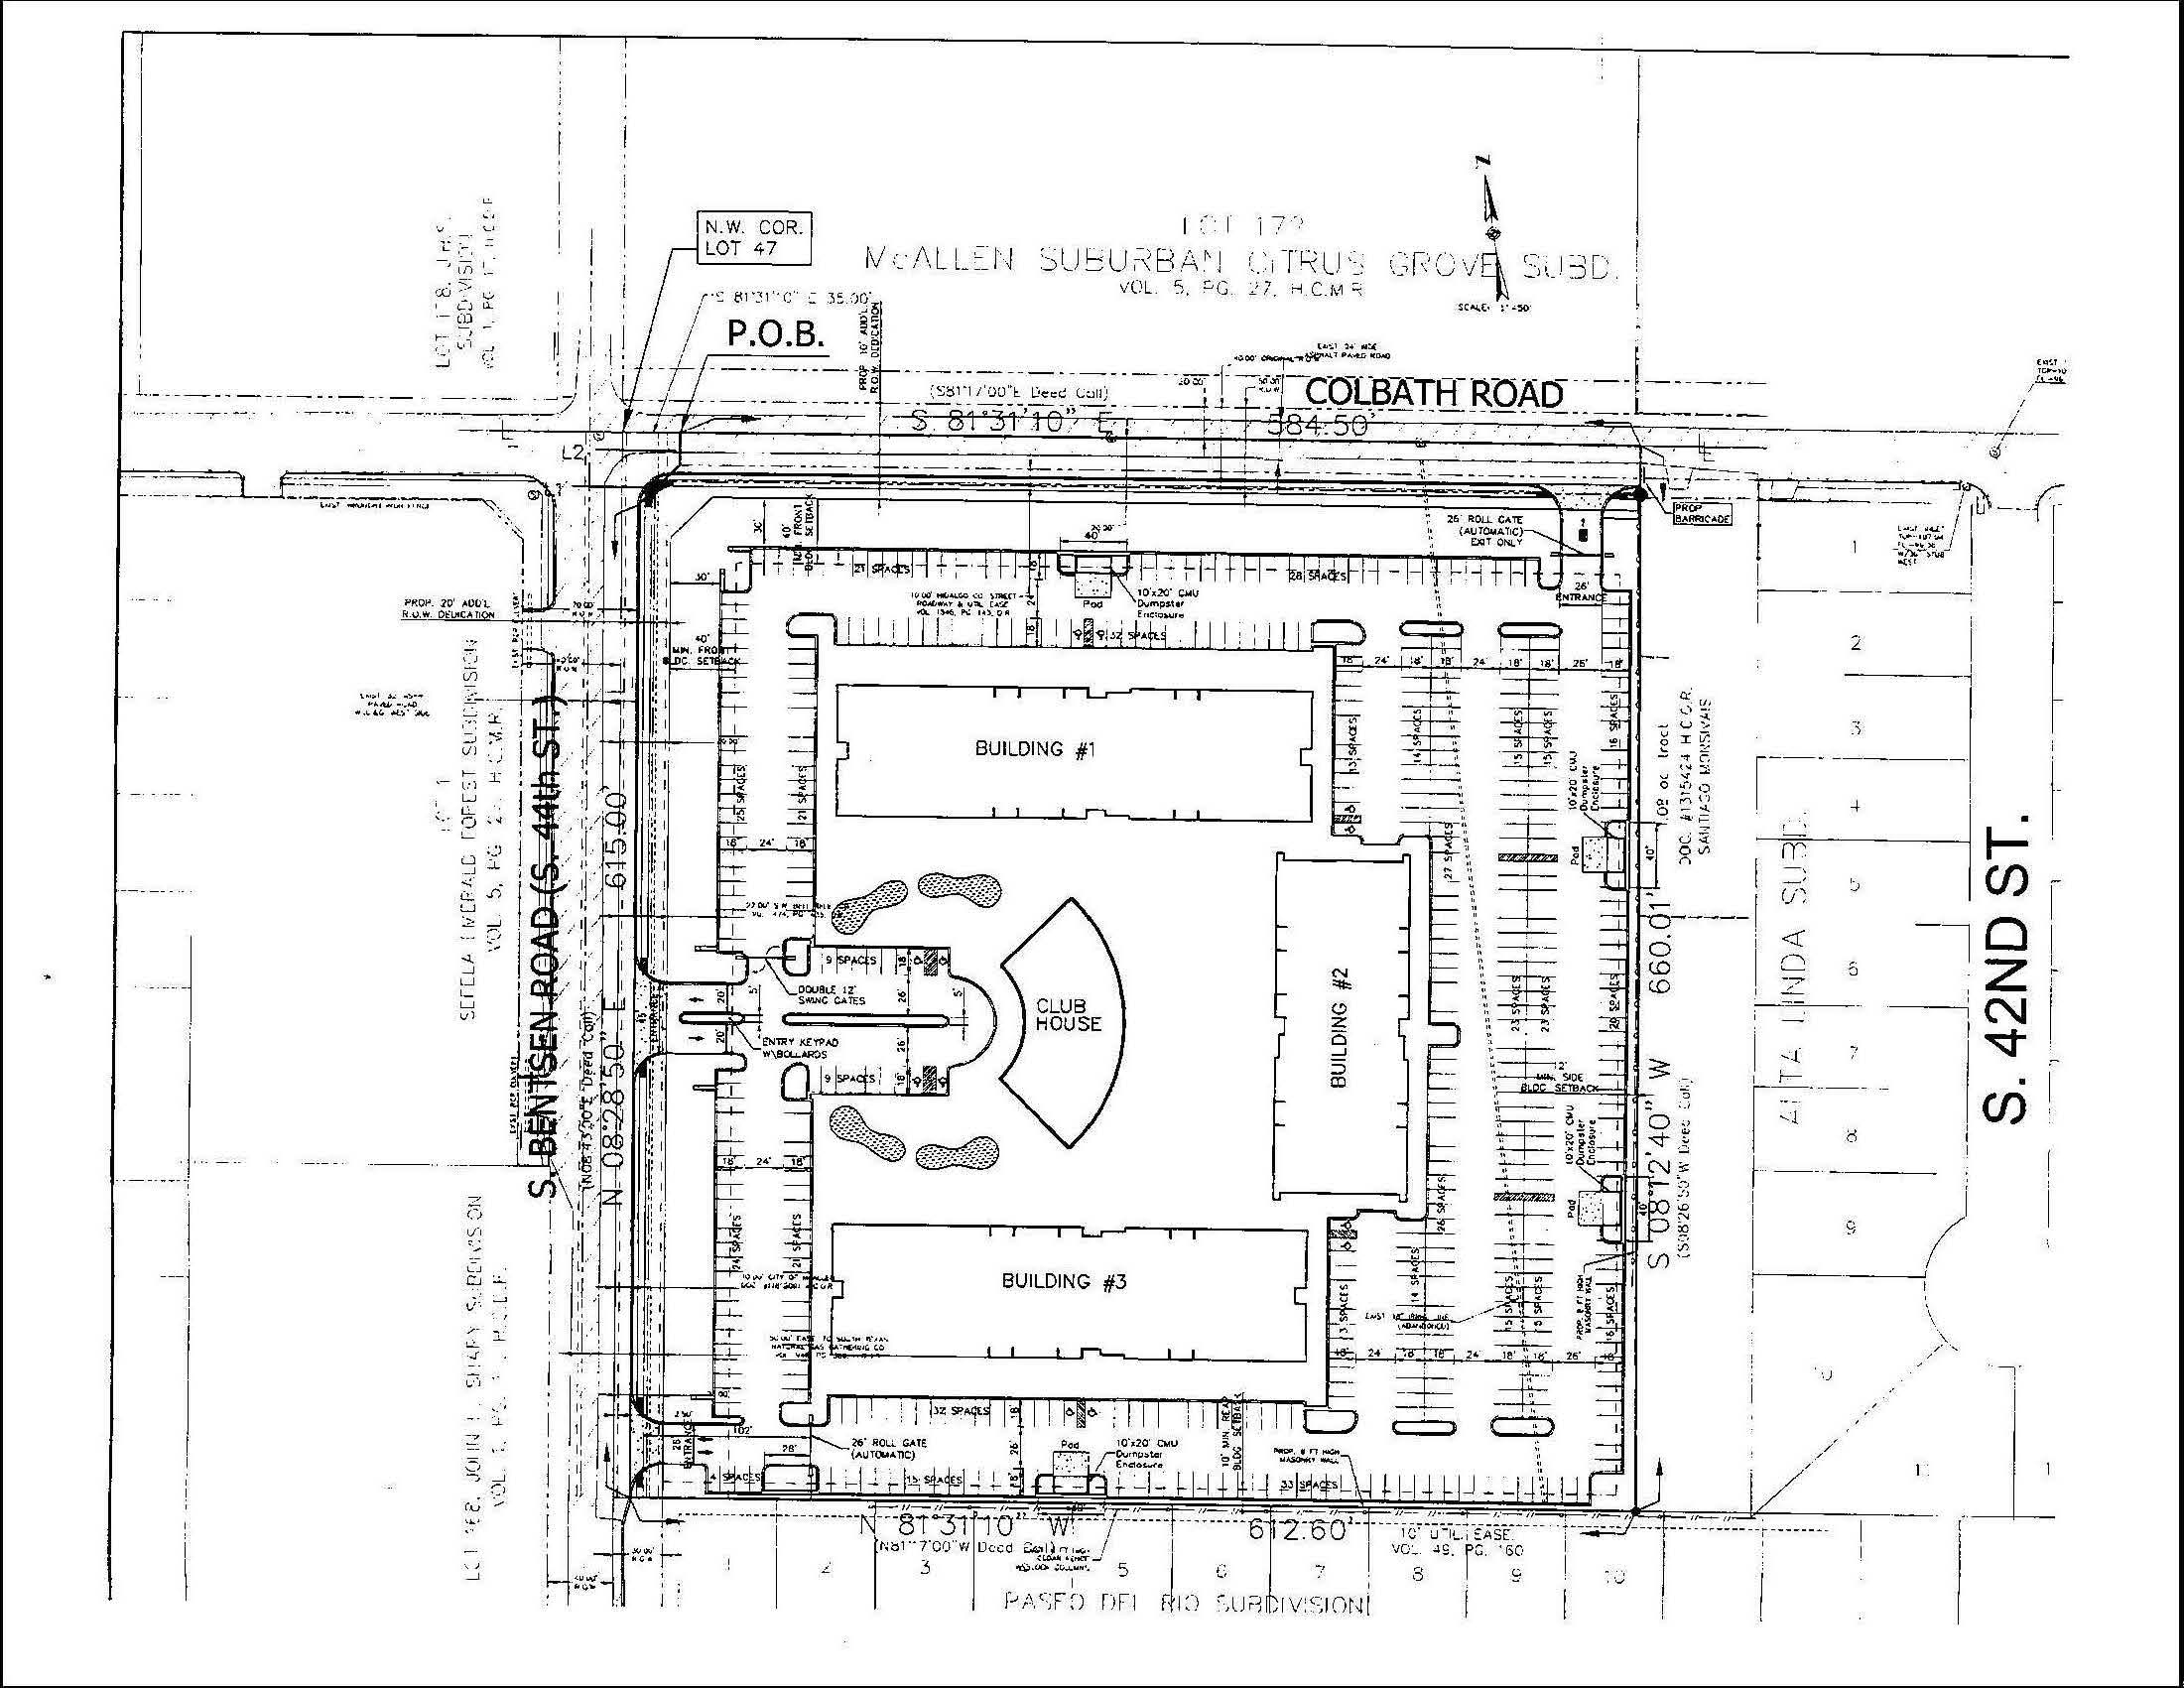 Example of a site plan